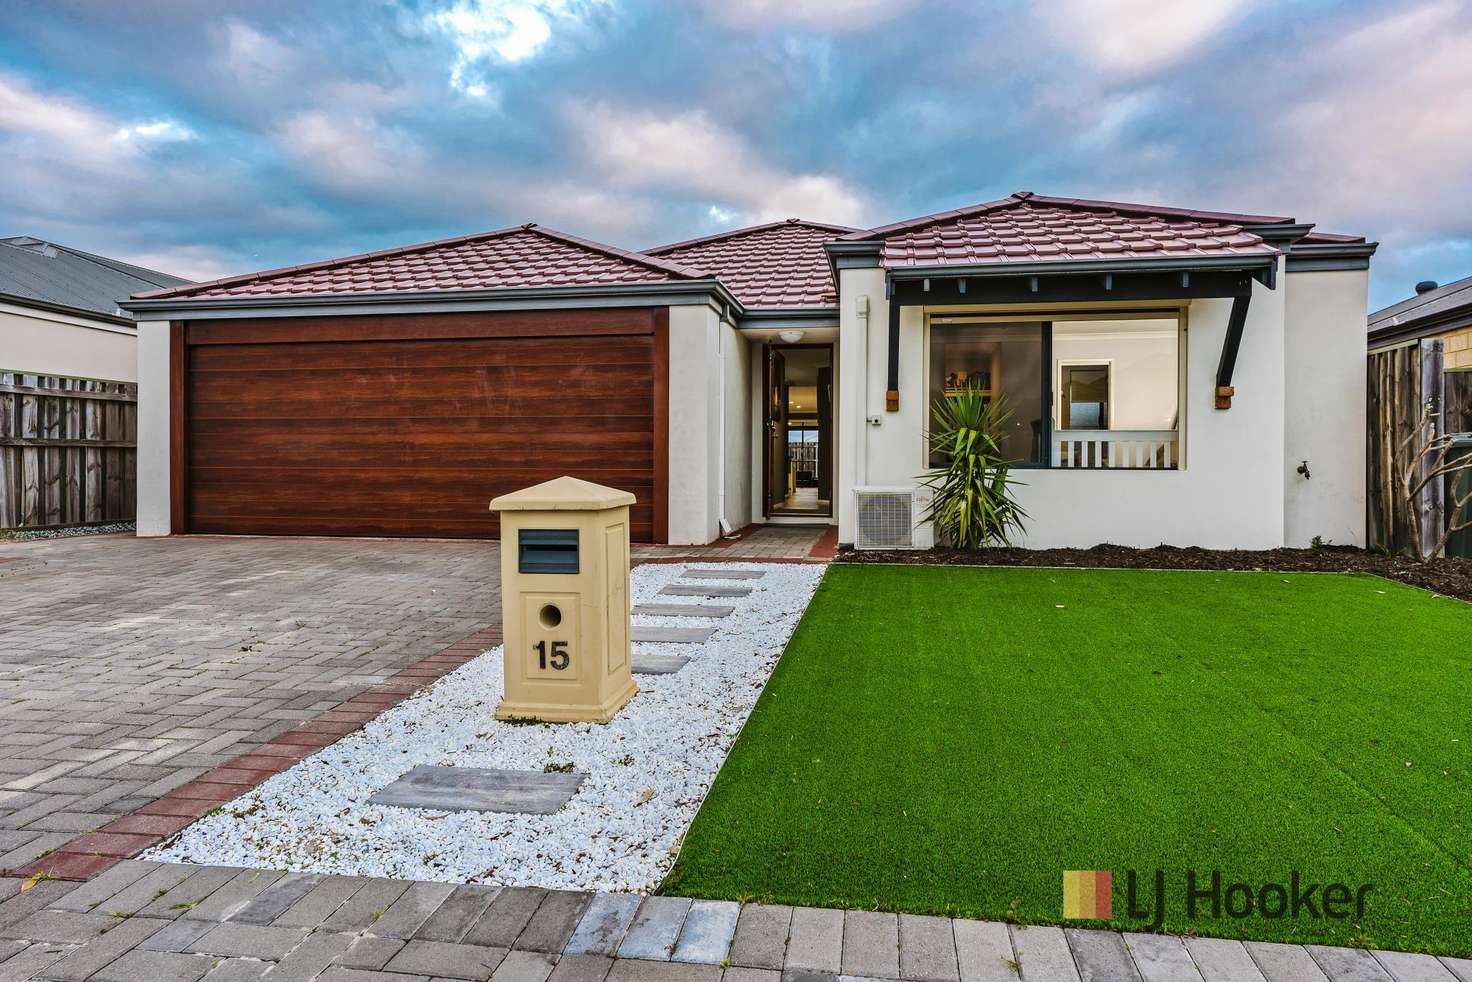 Main view of Homely house listing, 15 Solway Brace, Ellenbrook WA 6069